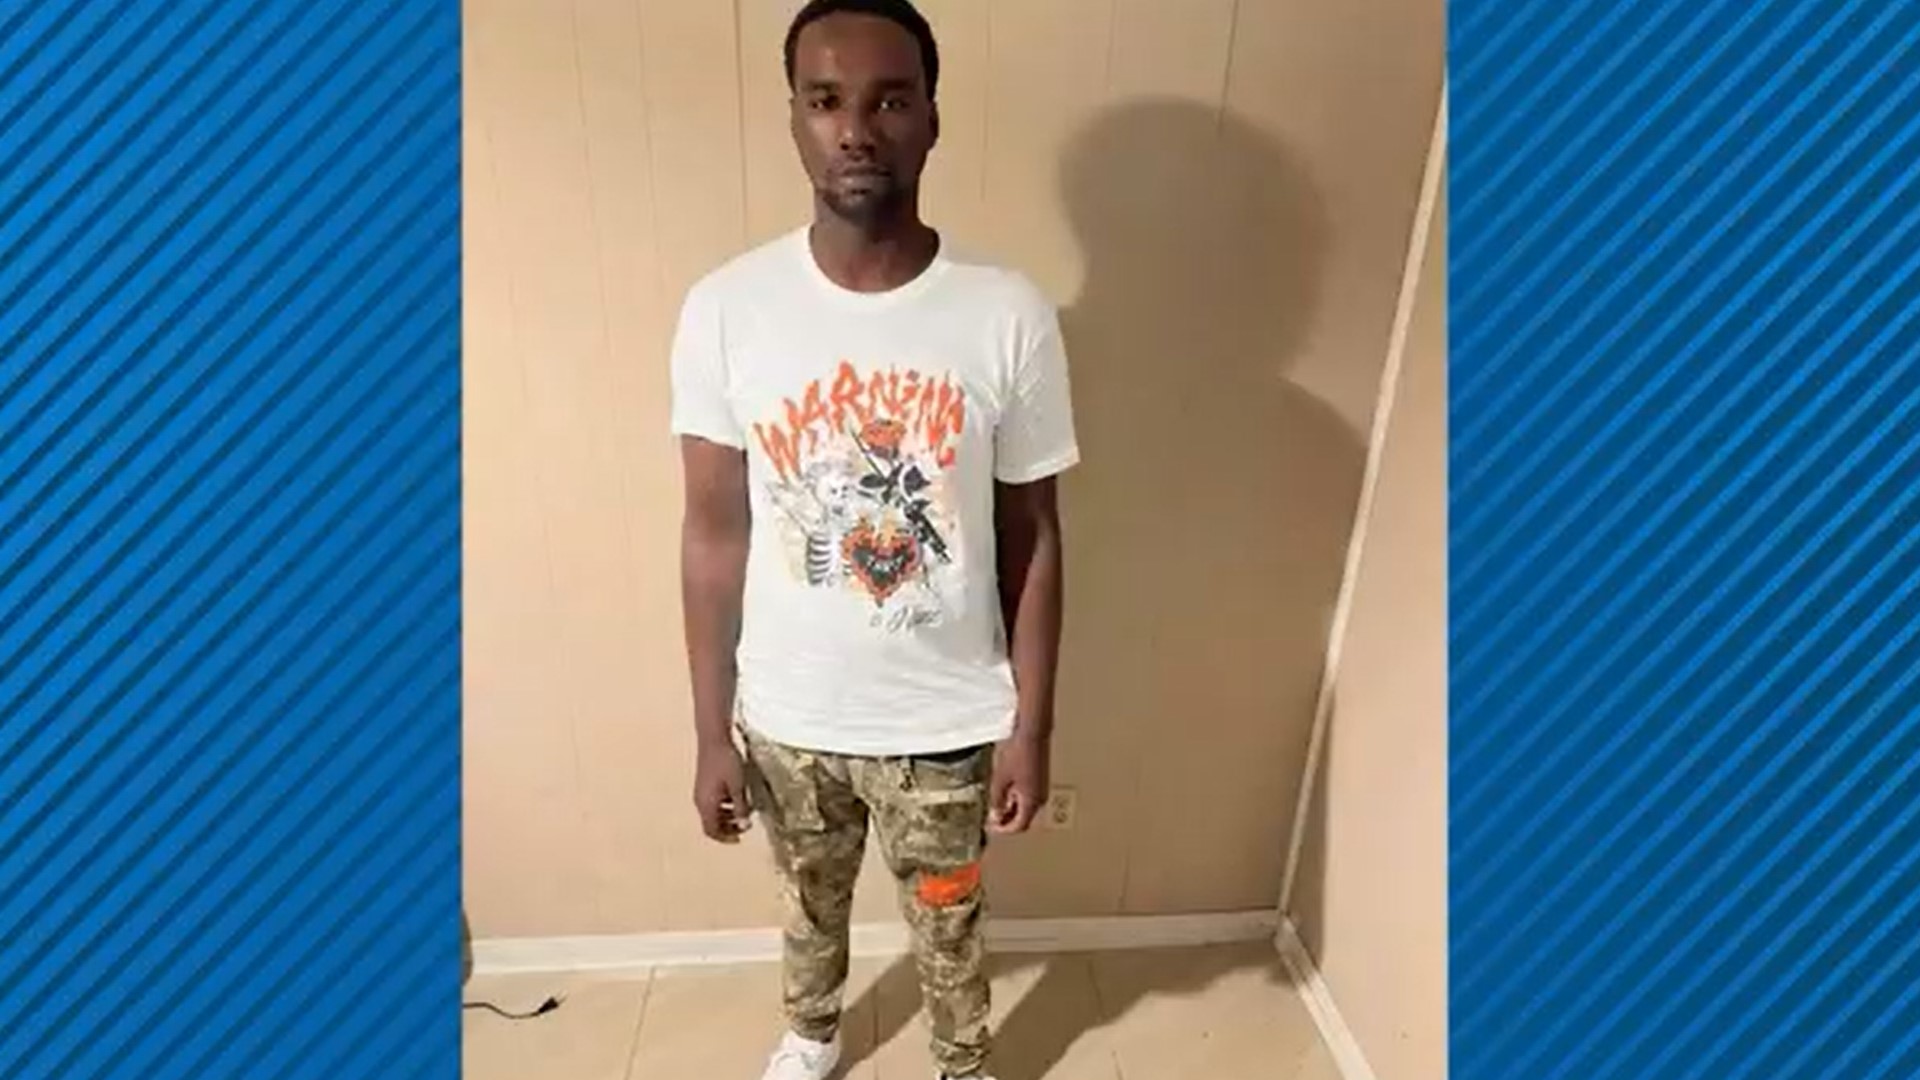 The man hit and killed by HPD officer responding to a call has been identified as Caleb Swafford, according to his brother.